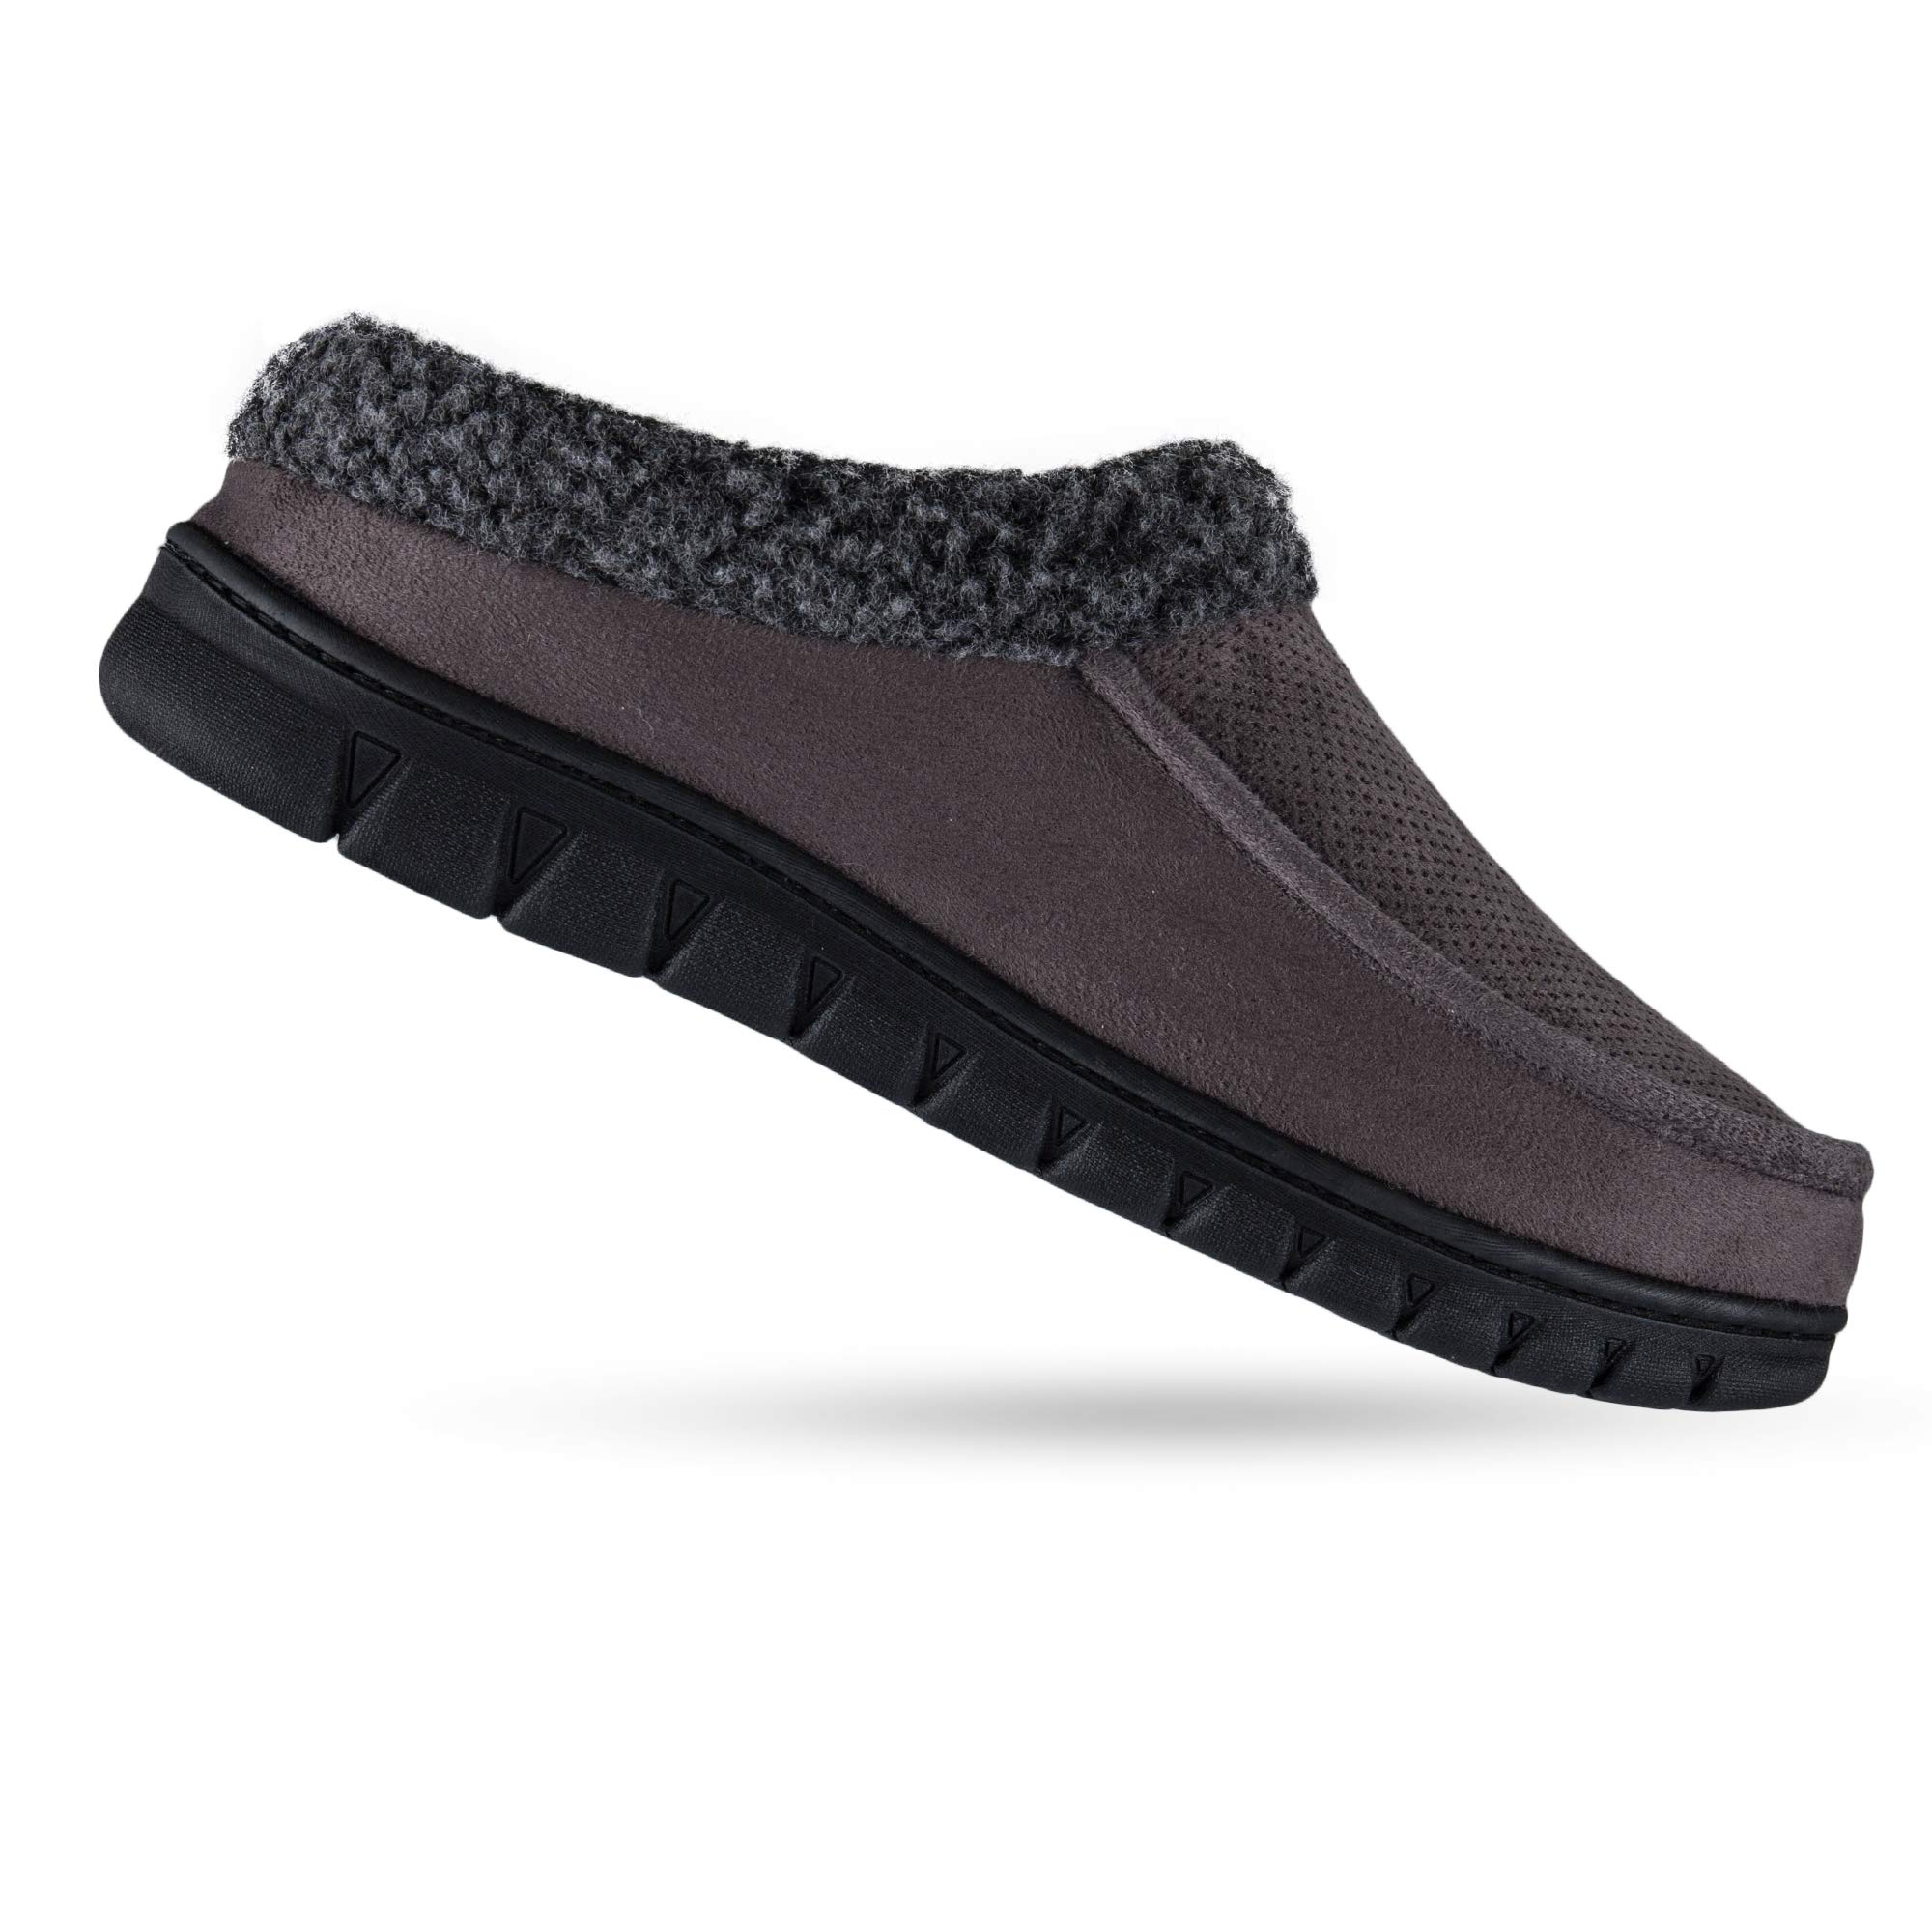 Dickies Men's Open Back Clogs and Scuffs Memory Foam Slippers with Indoor/Outdoor Sole